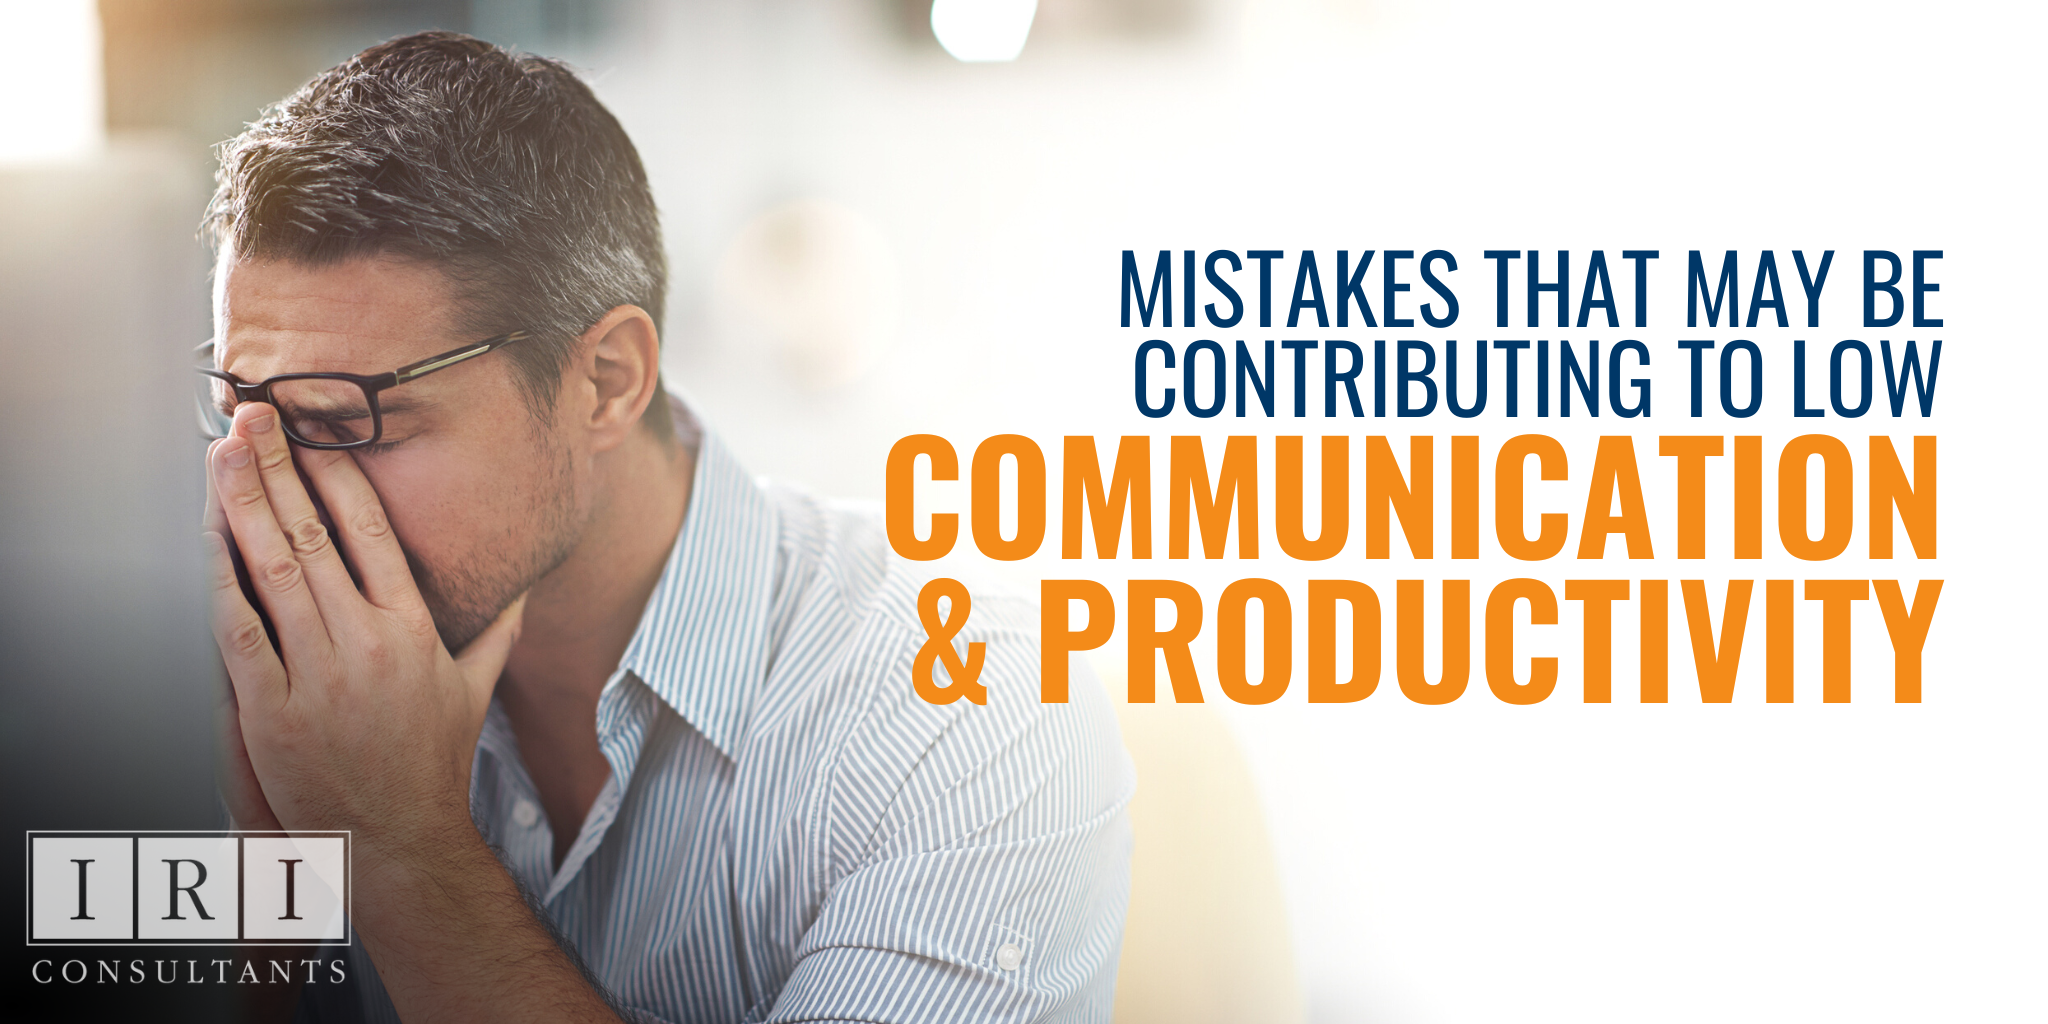 avoid low communication and productivity